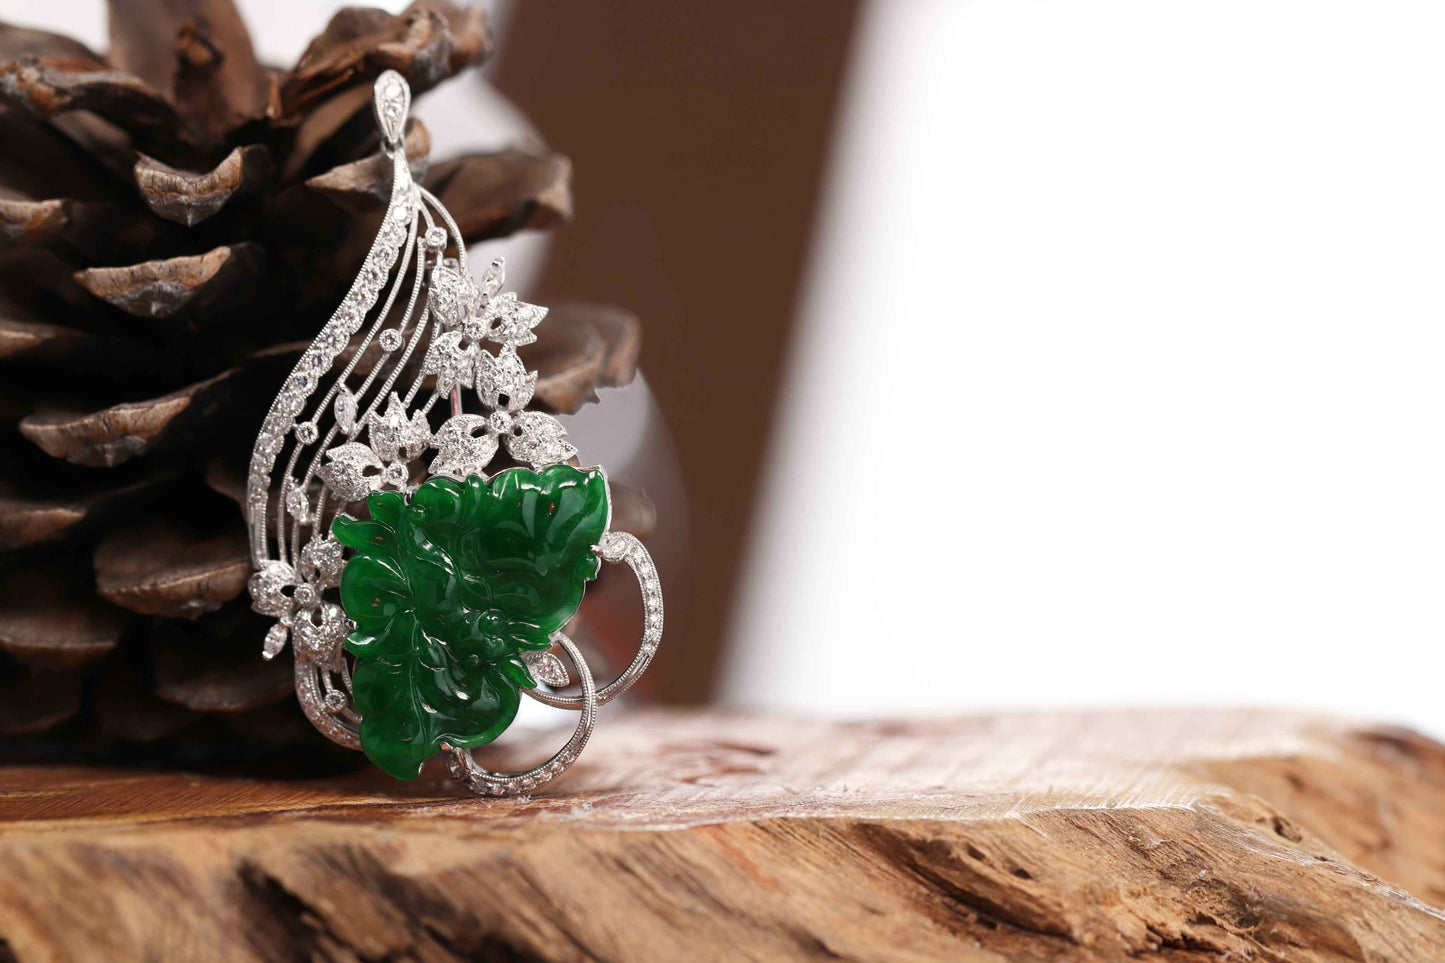 RealJade¨ "Imperial Butterfly" 18K White Gold Genuine Imperial Jadeite Pendant & Brooch with Diamonds